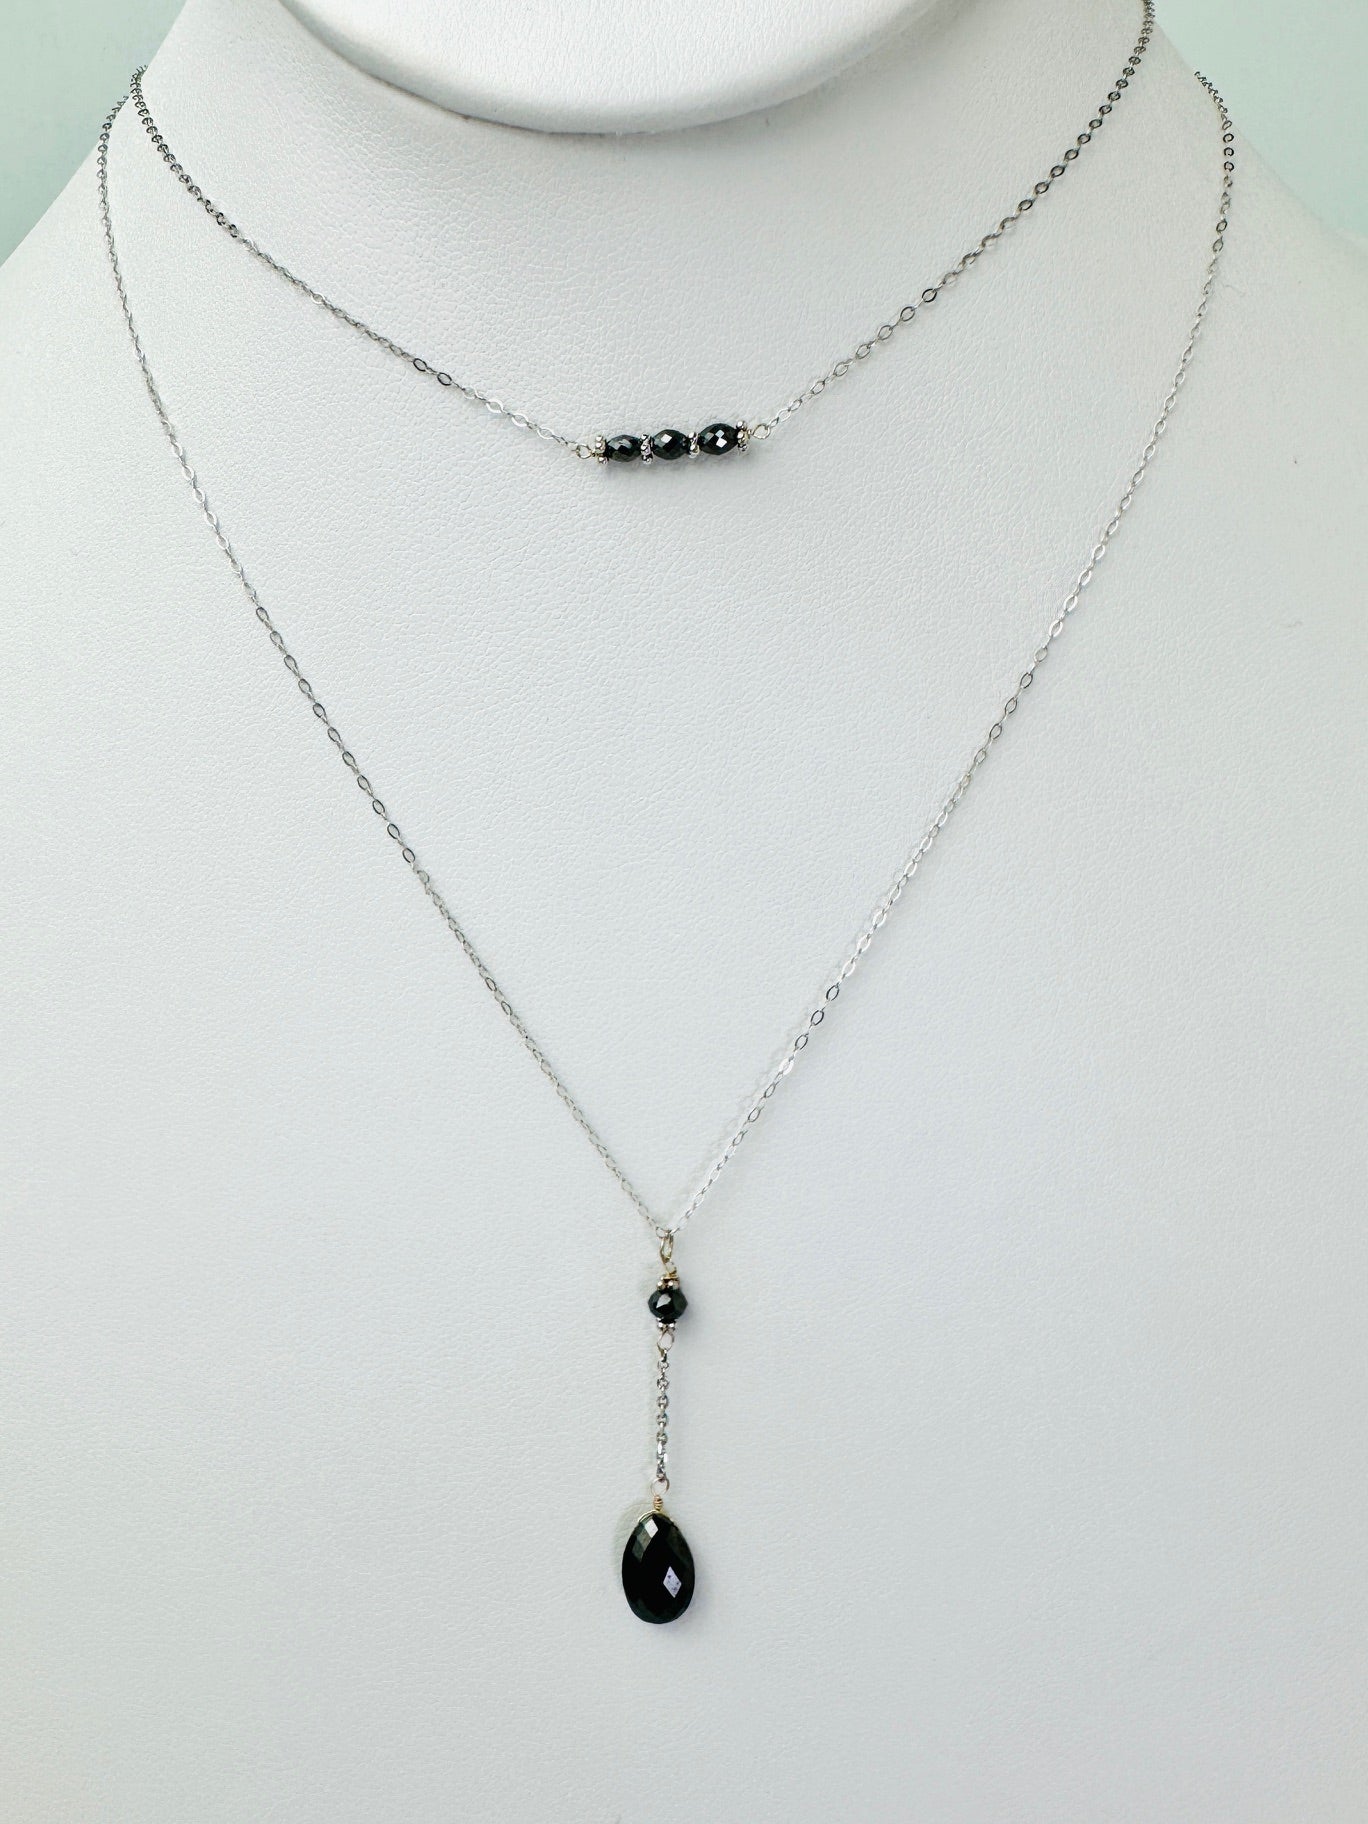 15"-17" Drop Necklace Featuring 2 Black Diamond Beads in 14K White Gold - NCK-826-DRPDIA14W-BK-09058